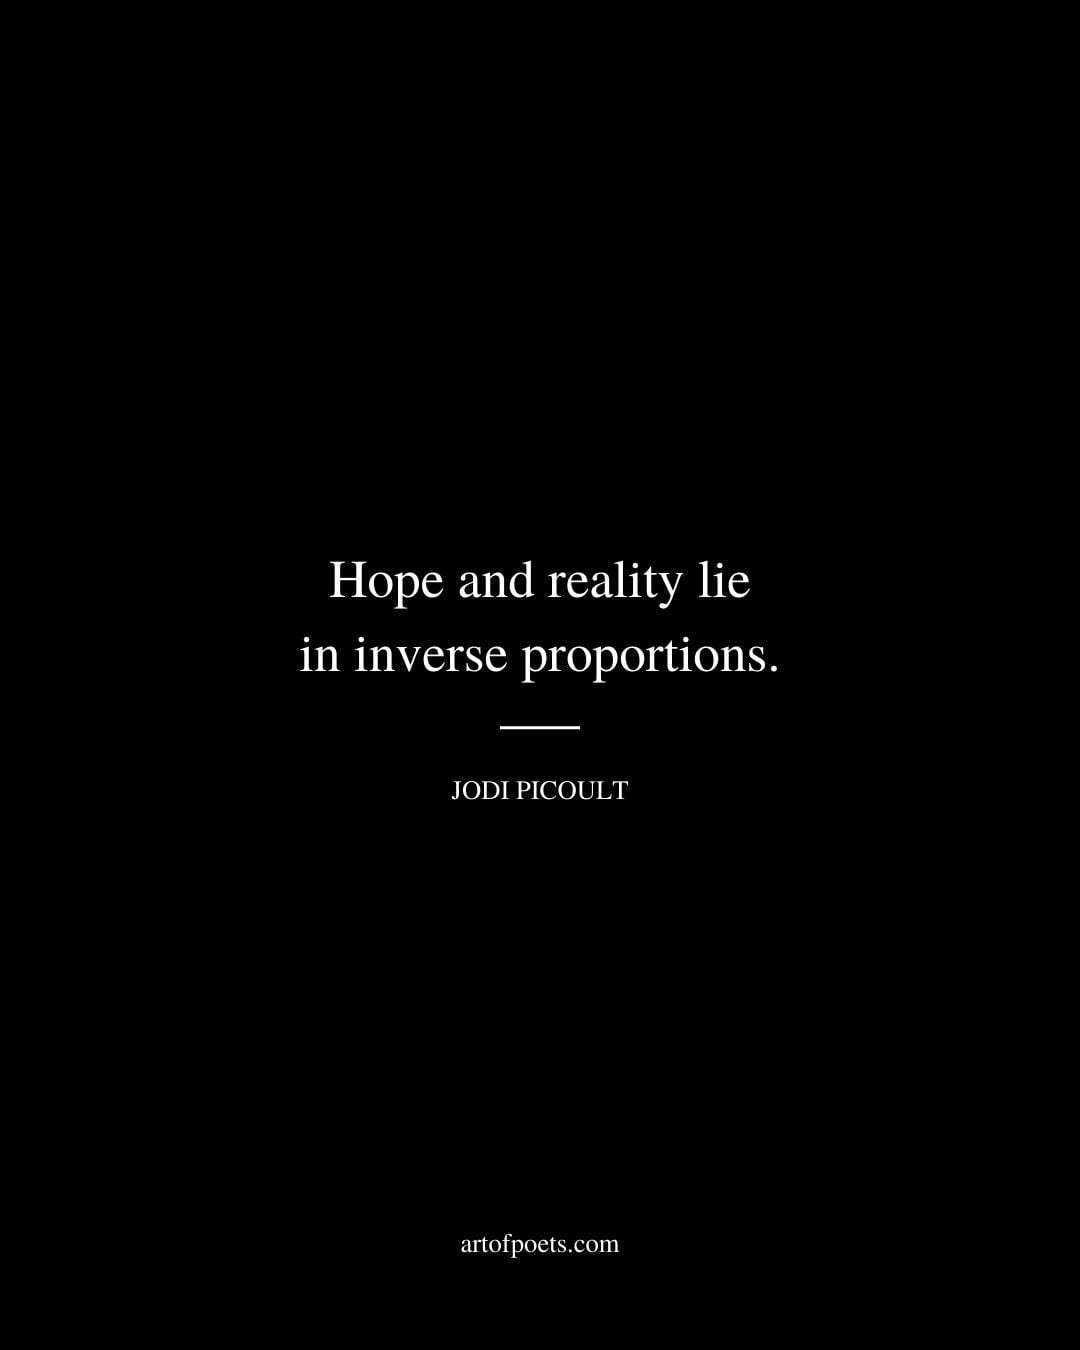 Hope and reality lie in inverse proportions. Jodi Picoult